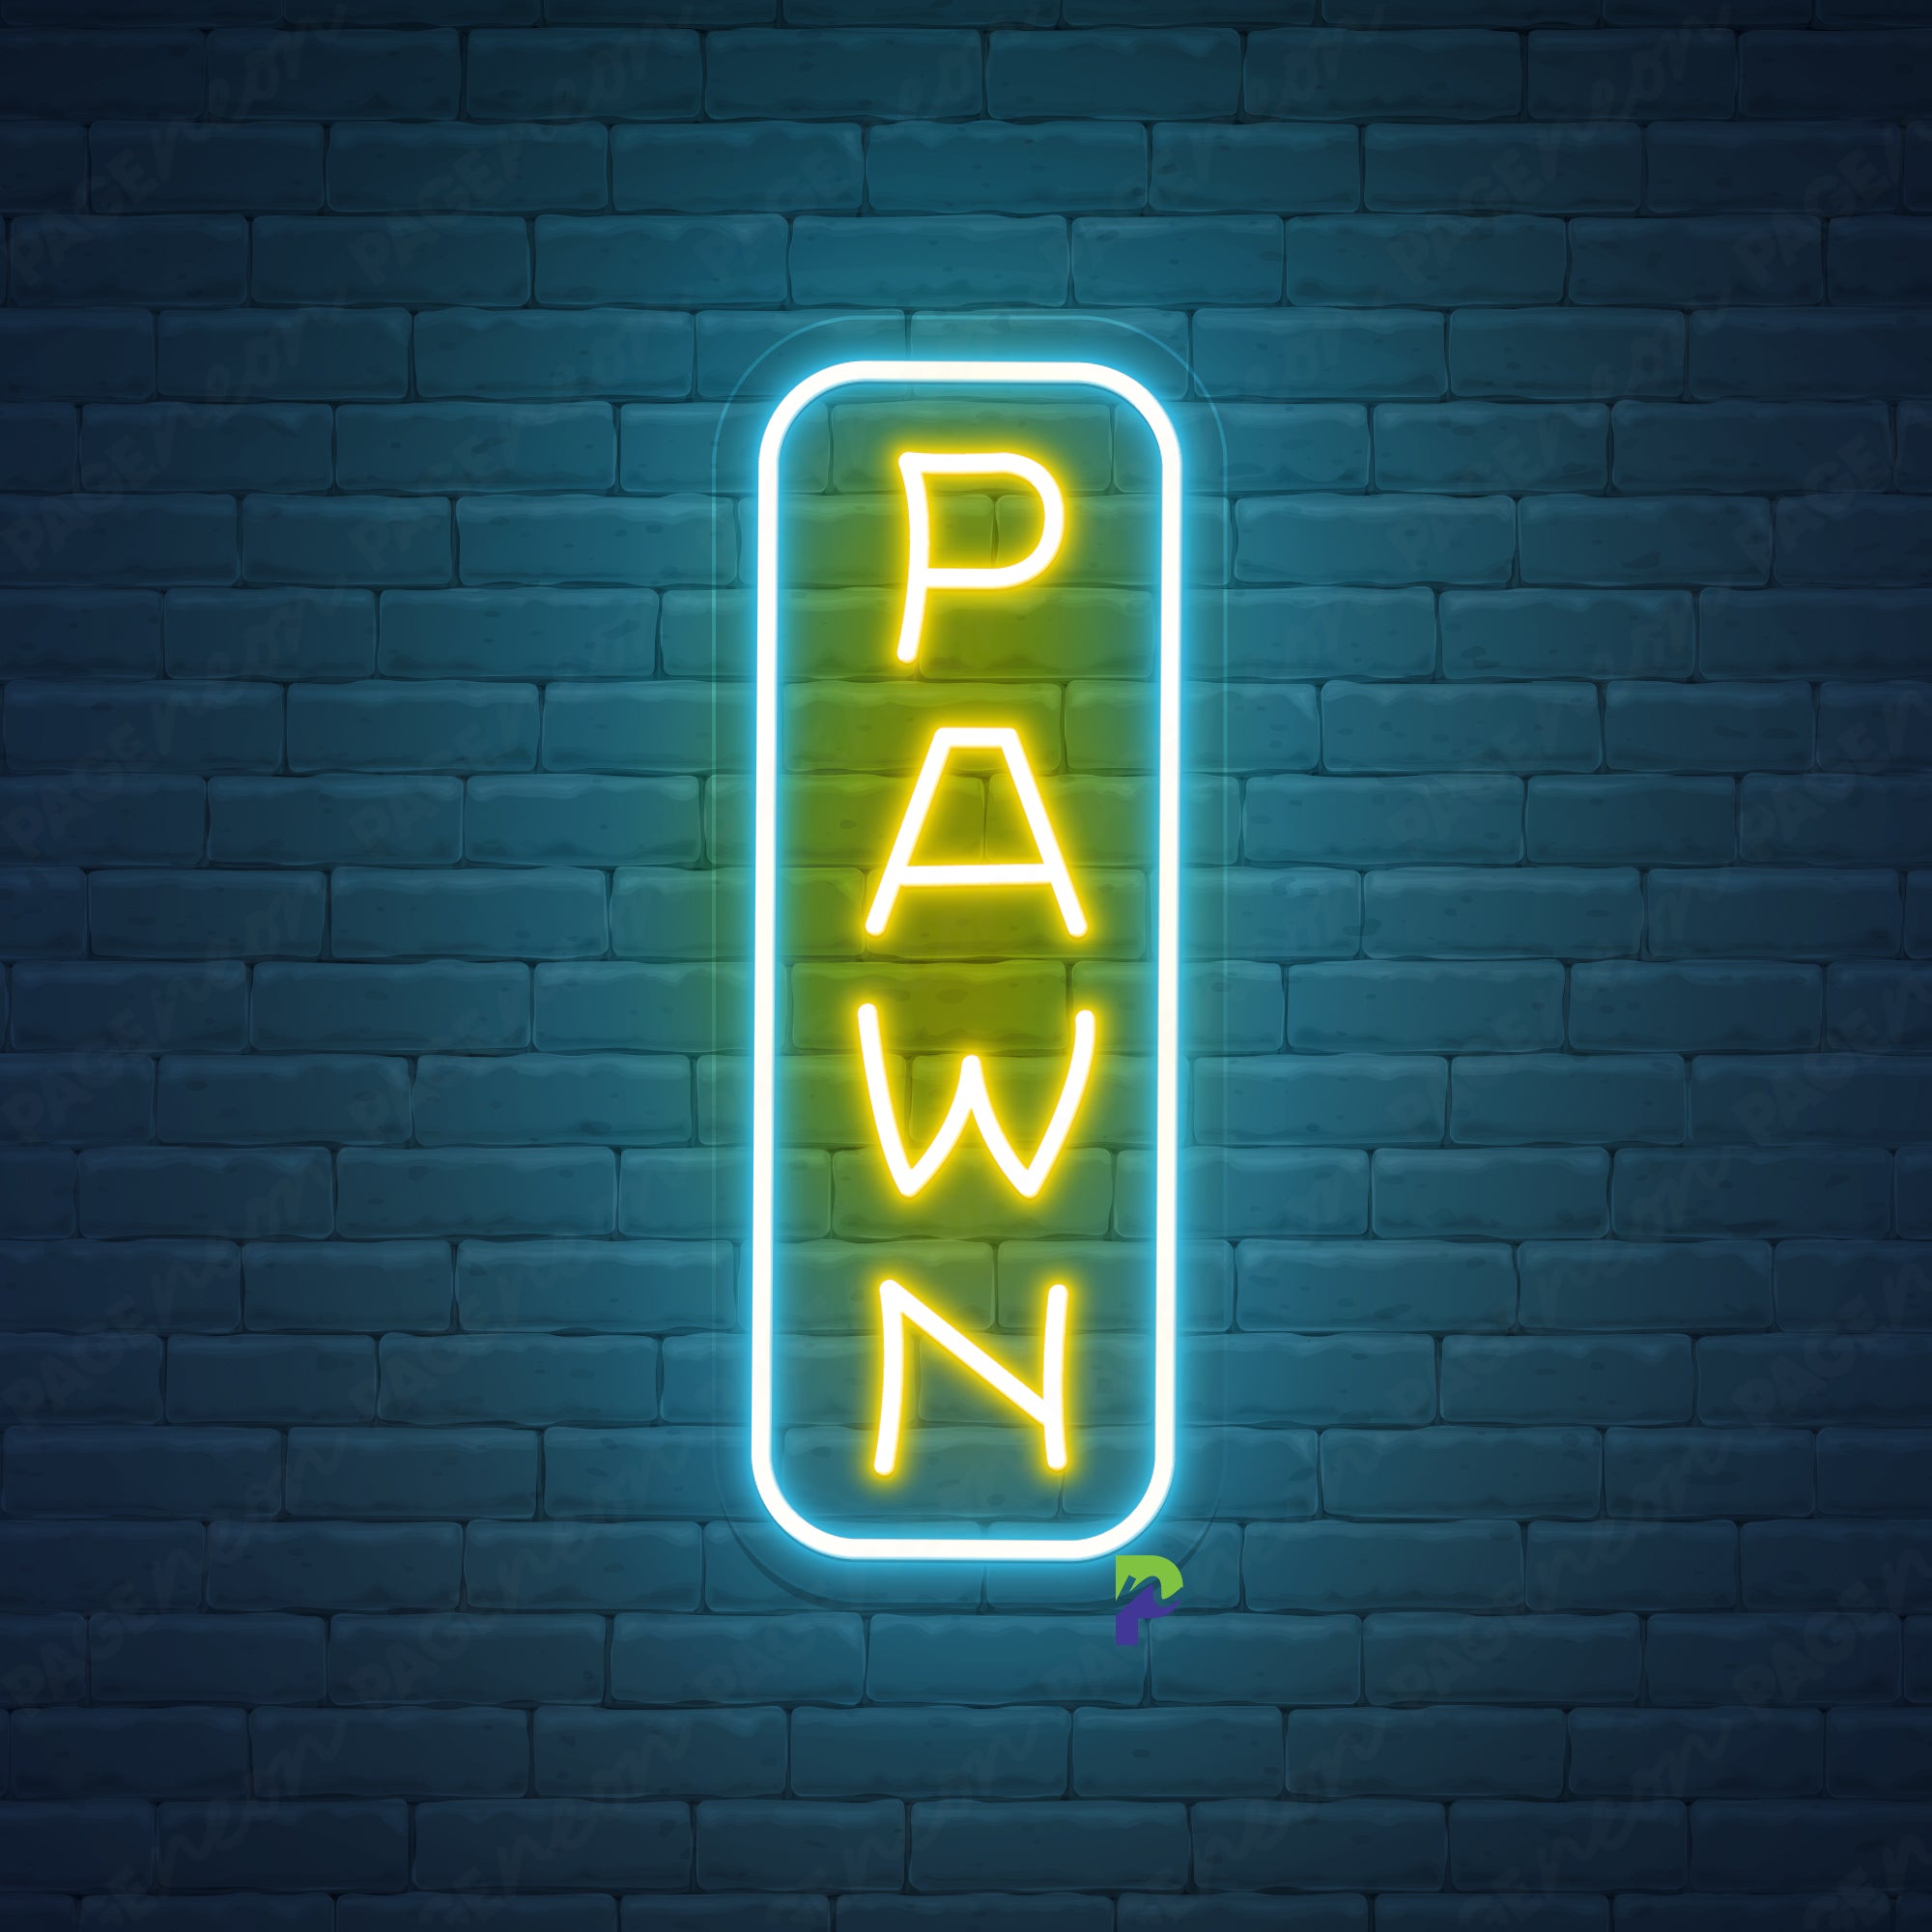 Pawn Shop Neon Signs Vertical Led Light